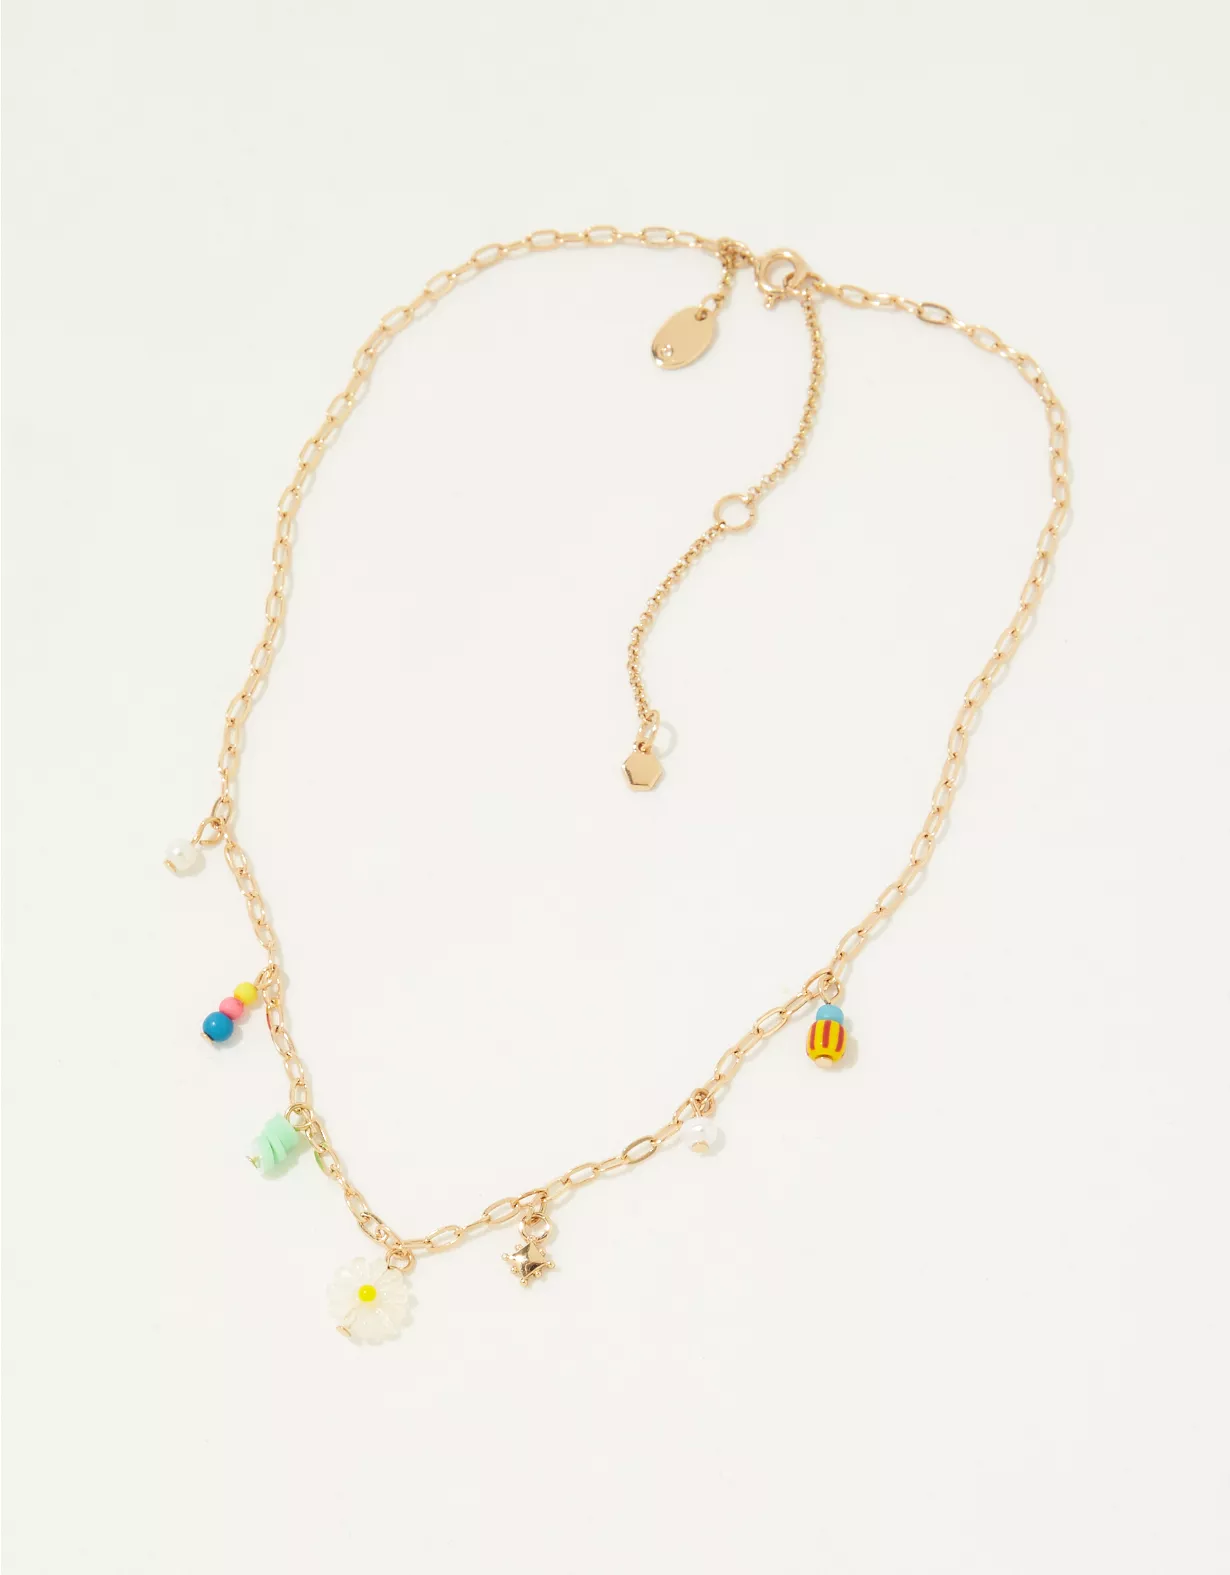 Aerie Gold Beaded Necklace